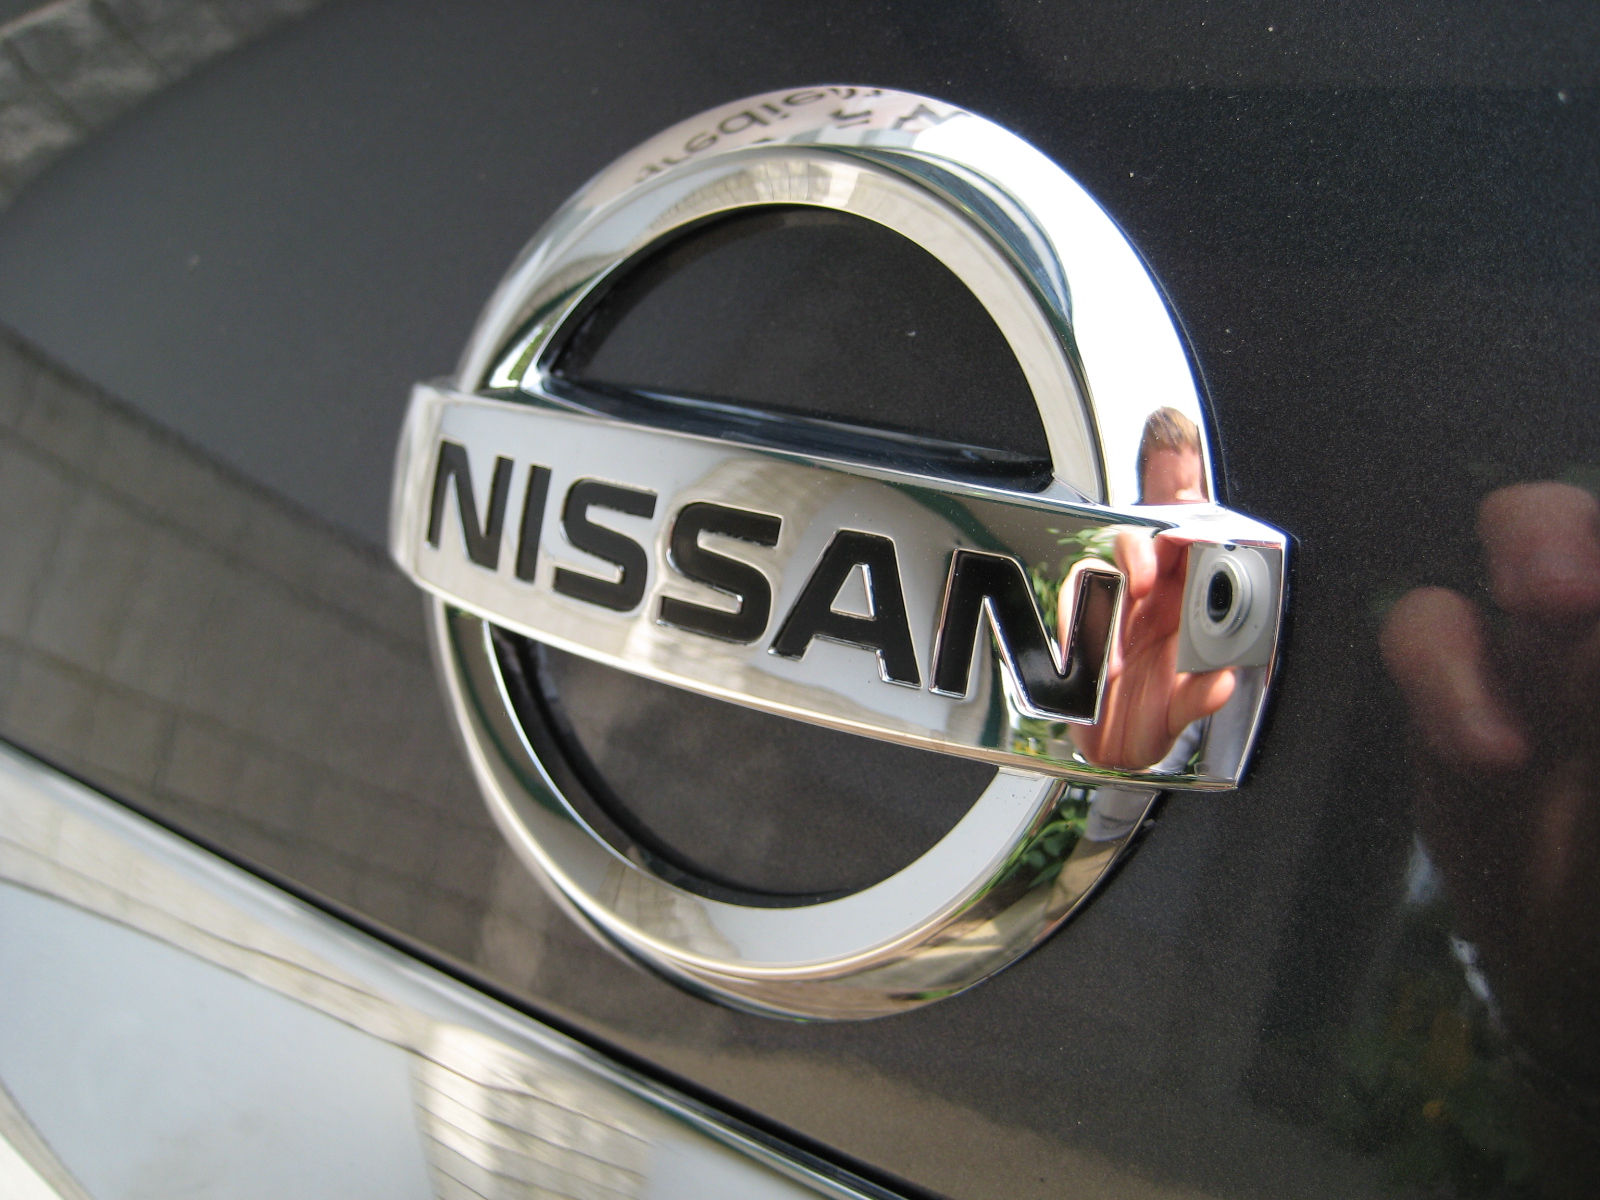 Nissan Logo, Nissan Car Symbol Meaning And History Car Brand